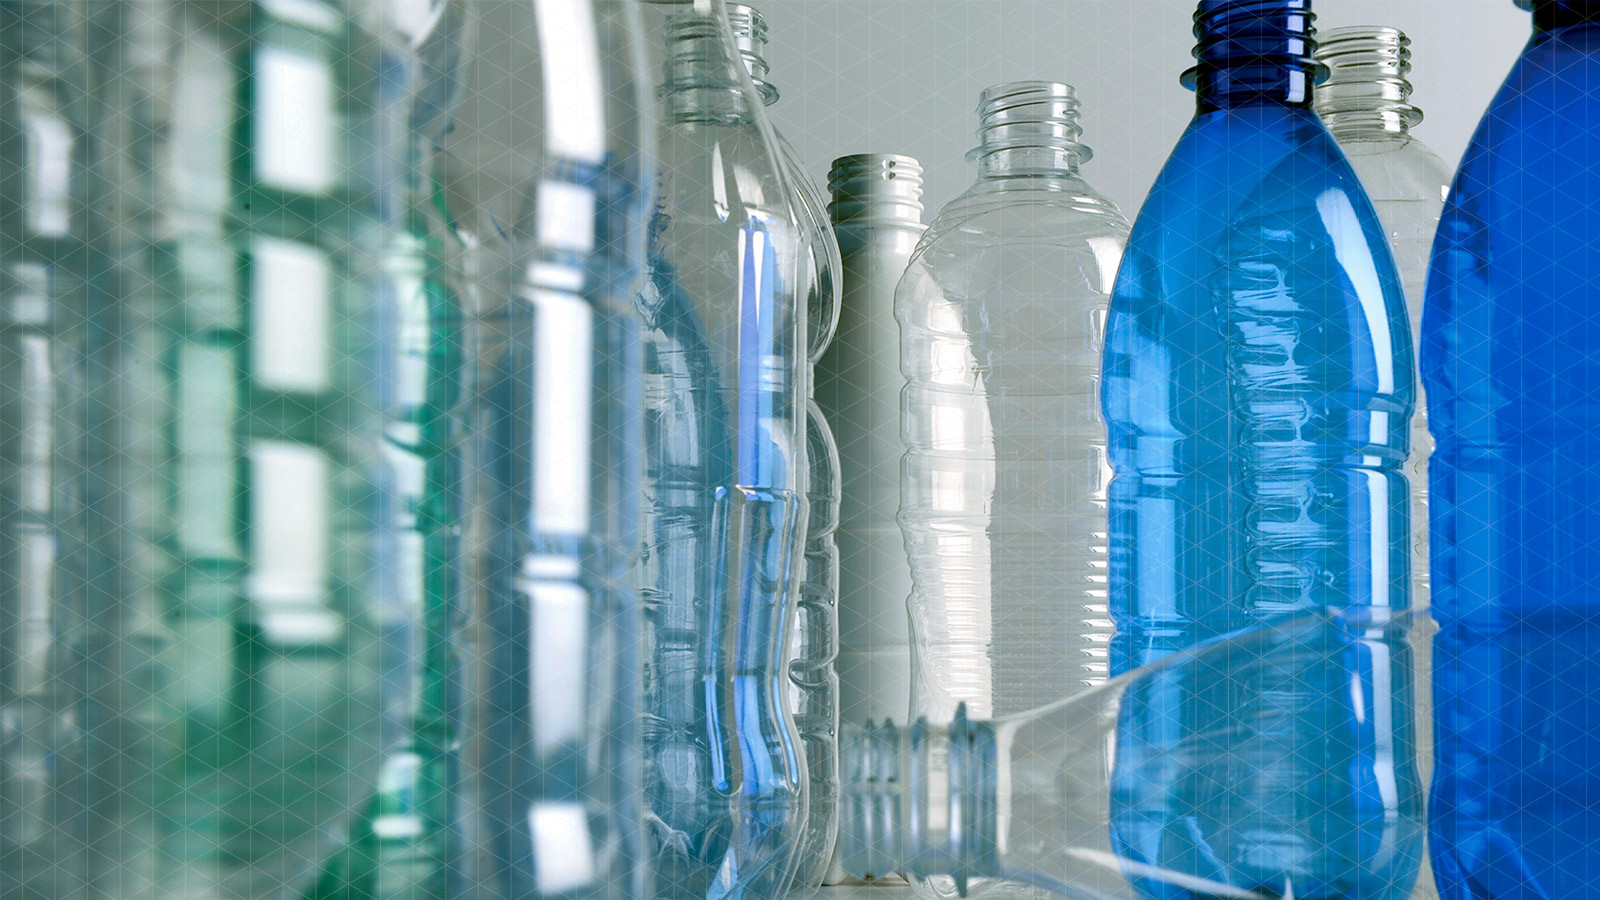 At the forefront of research and technological innovation for the plastics sector